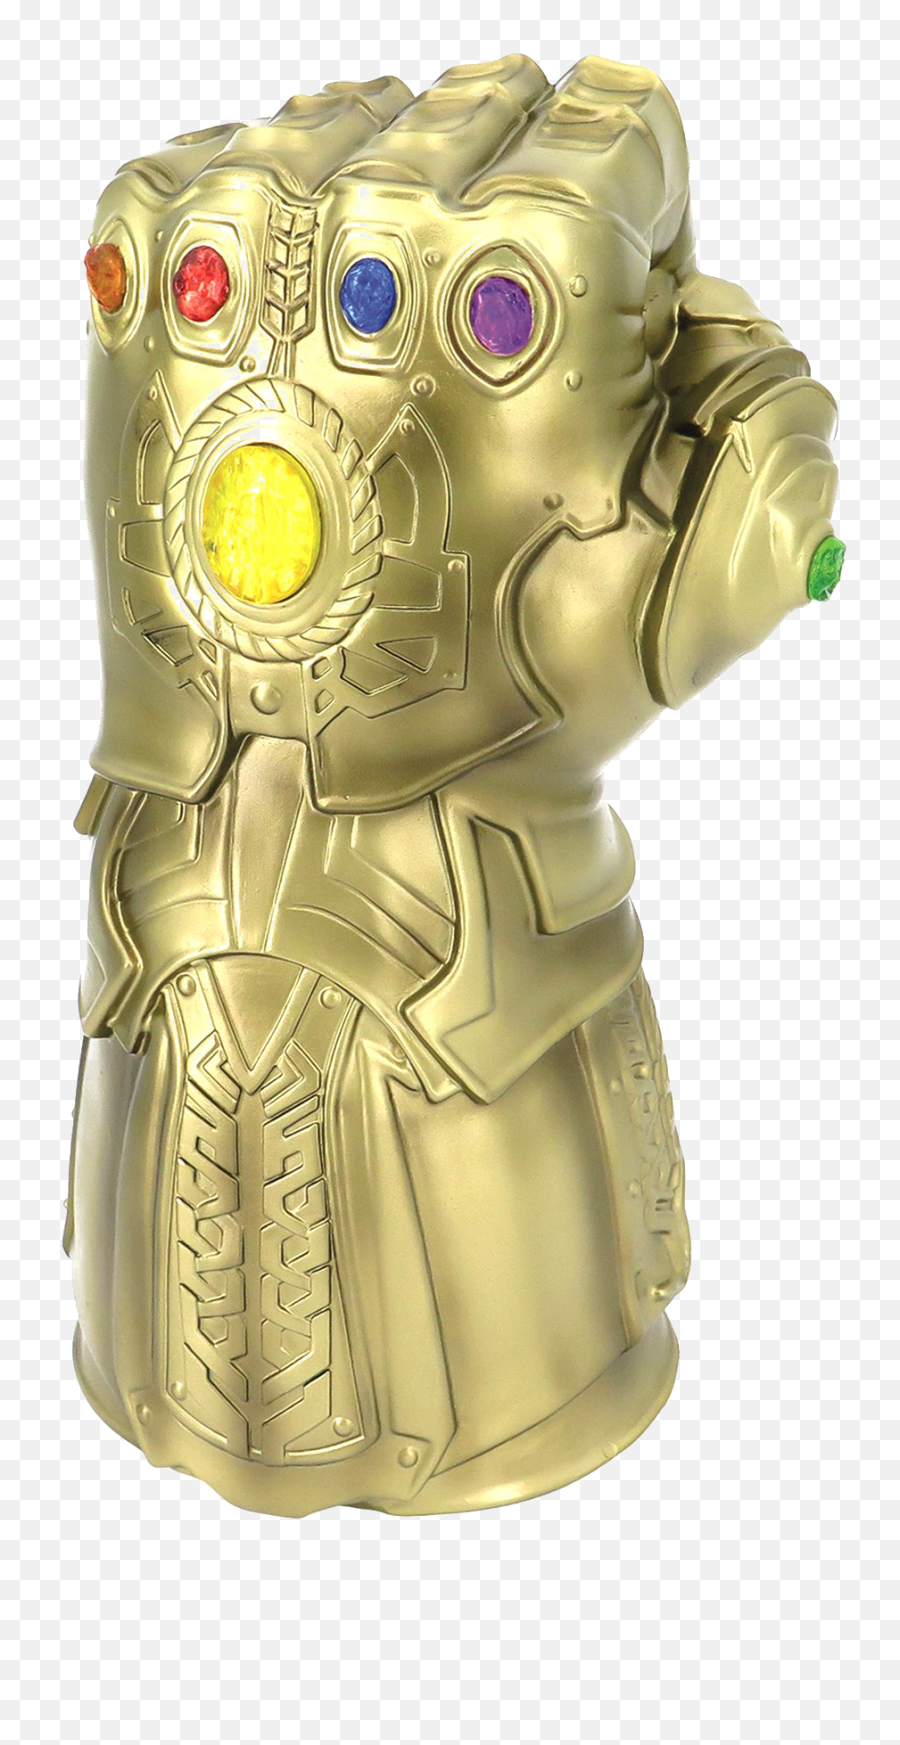 Thanos Infinity Stone Gauntlet Png Pic - Thanos Gauntlet Png Transparent Emoji,Infinity Gauntlet Emoji